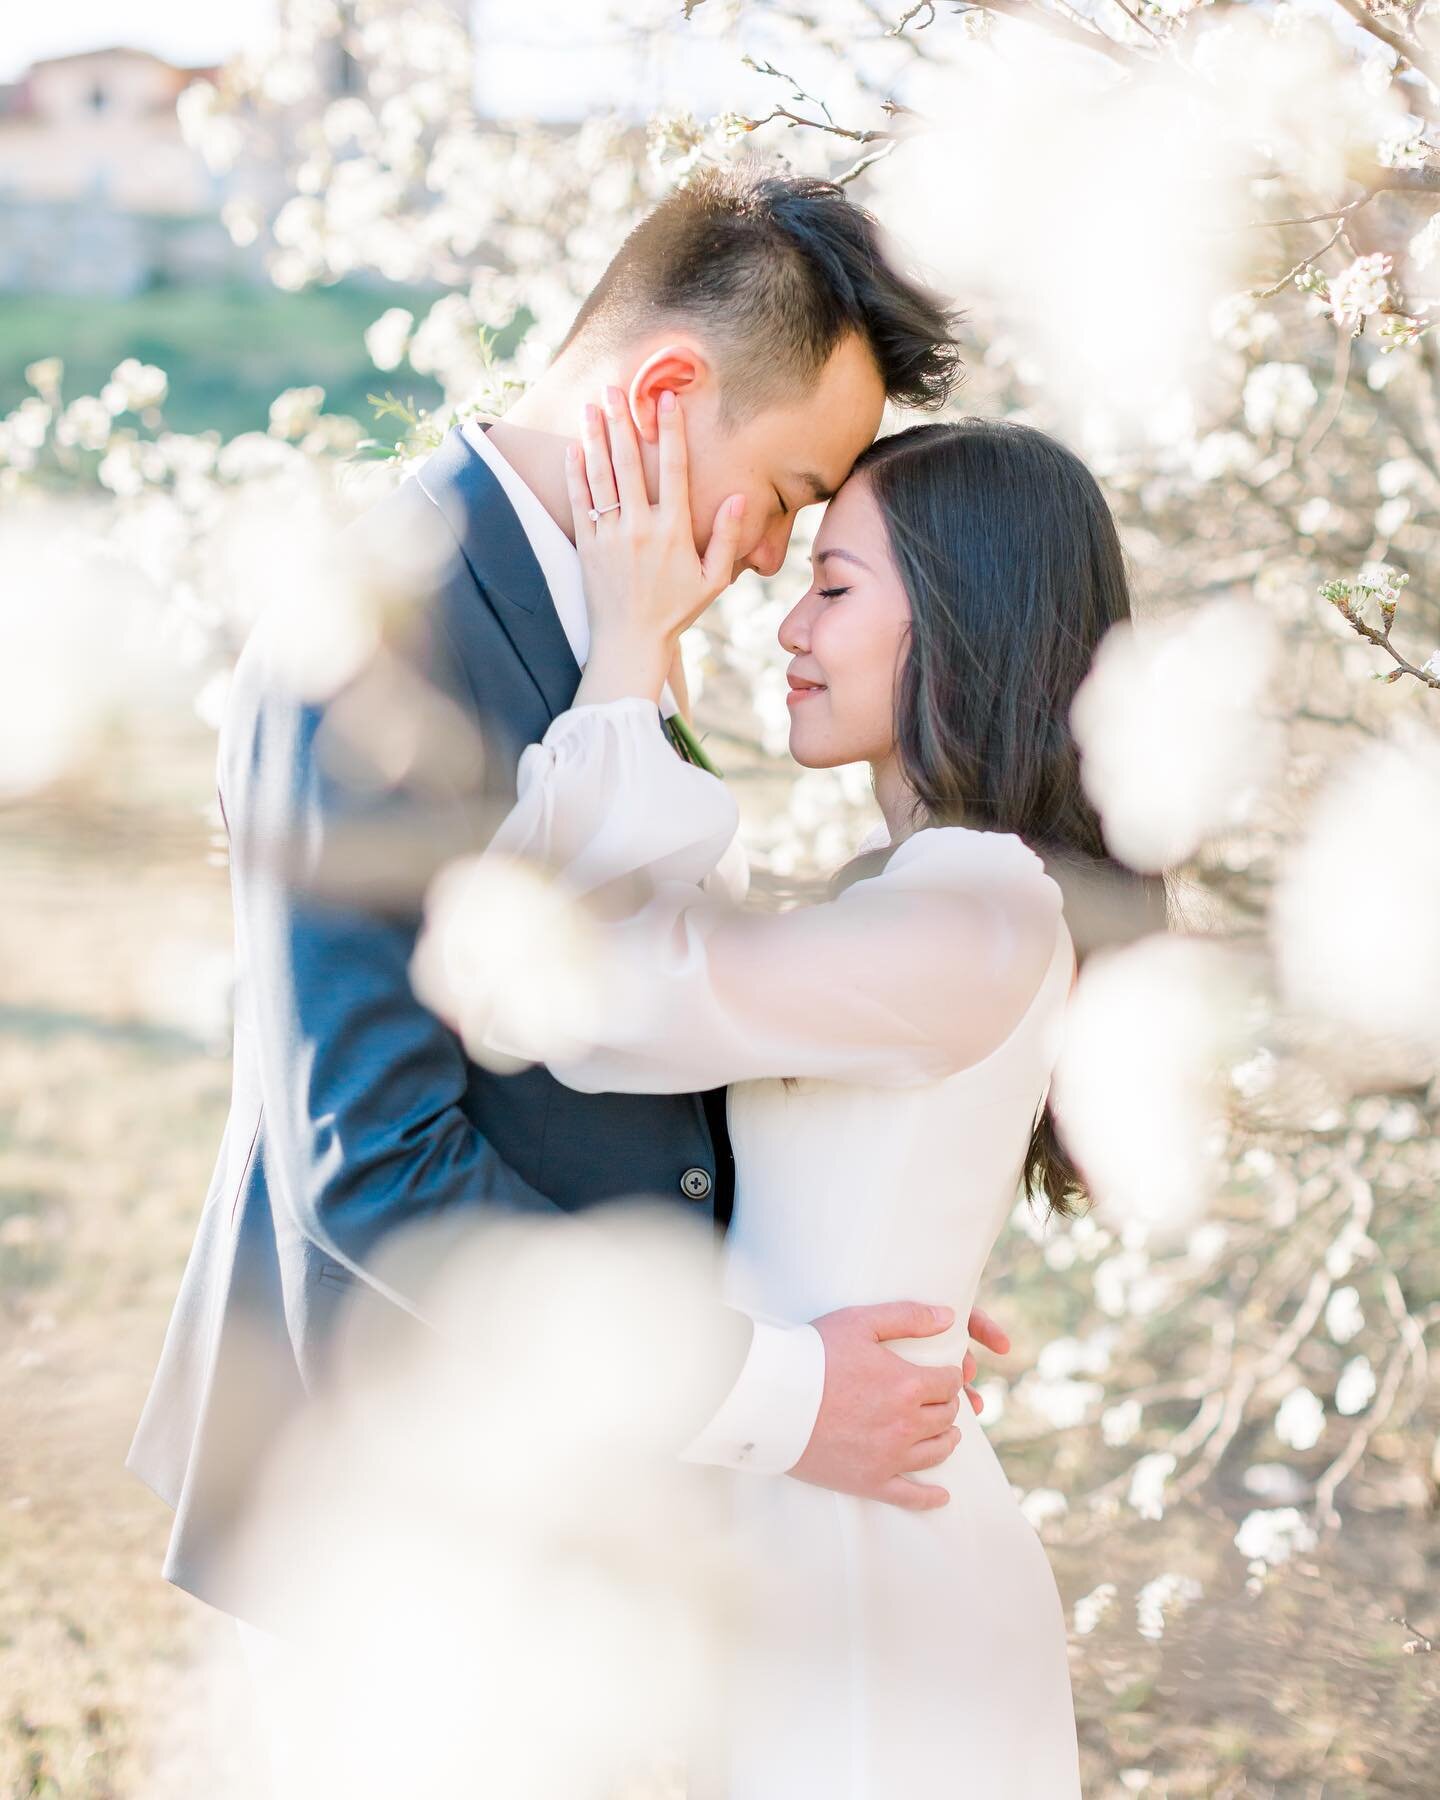 Hooray! It&rsquo;s wedding day for Quinn &amp; Khanh! I&rsquo;ve dearly enjoyed getting to know them throughout this year and have loved the friendship we built. 

Excited to capture and celebrate with them at the beautiful @stoneyridgevilla today 🥂